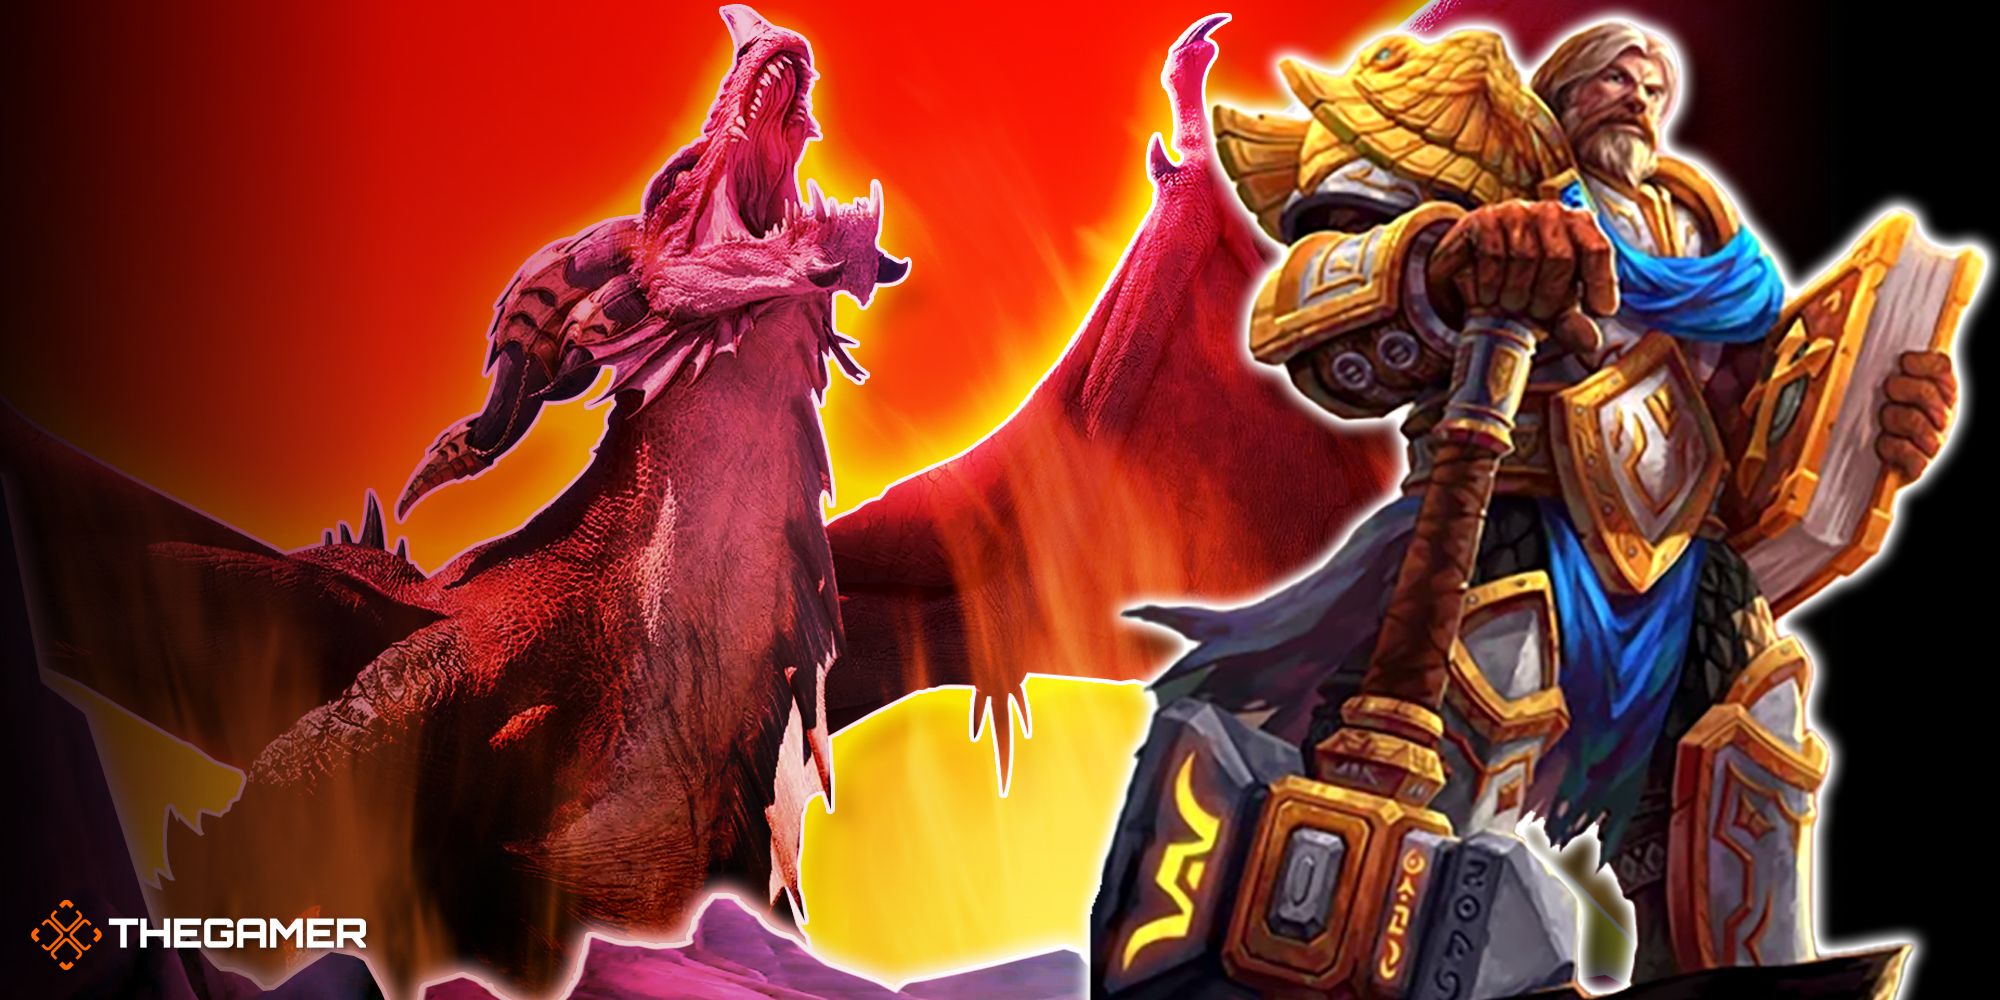 A Holy Paladin and a Red Dragon from World of Warcraft.